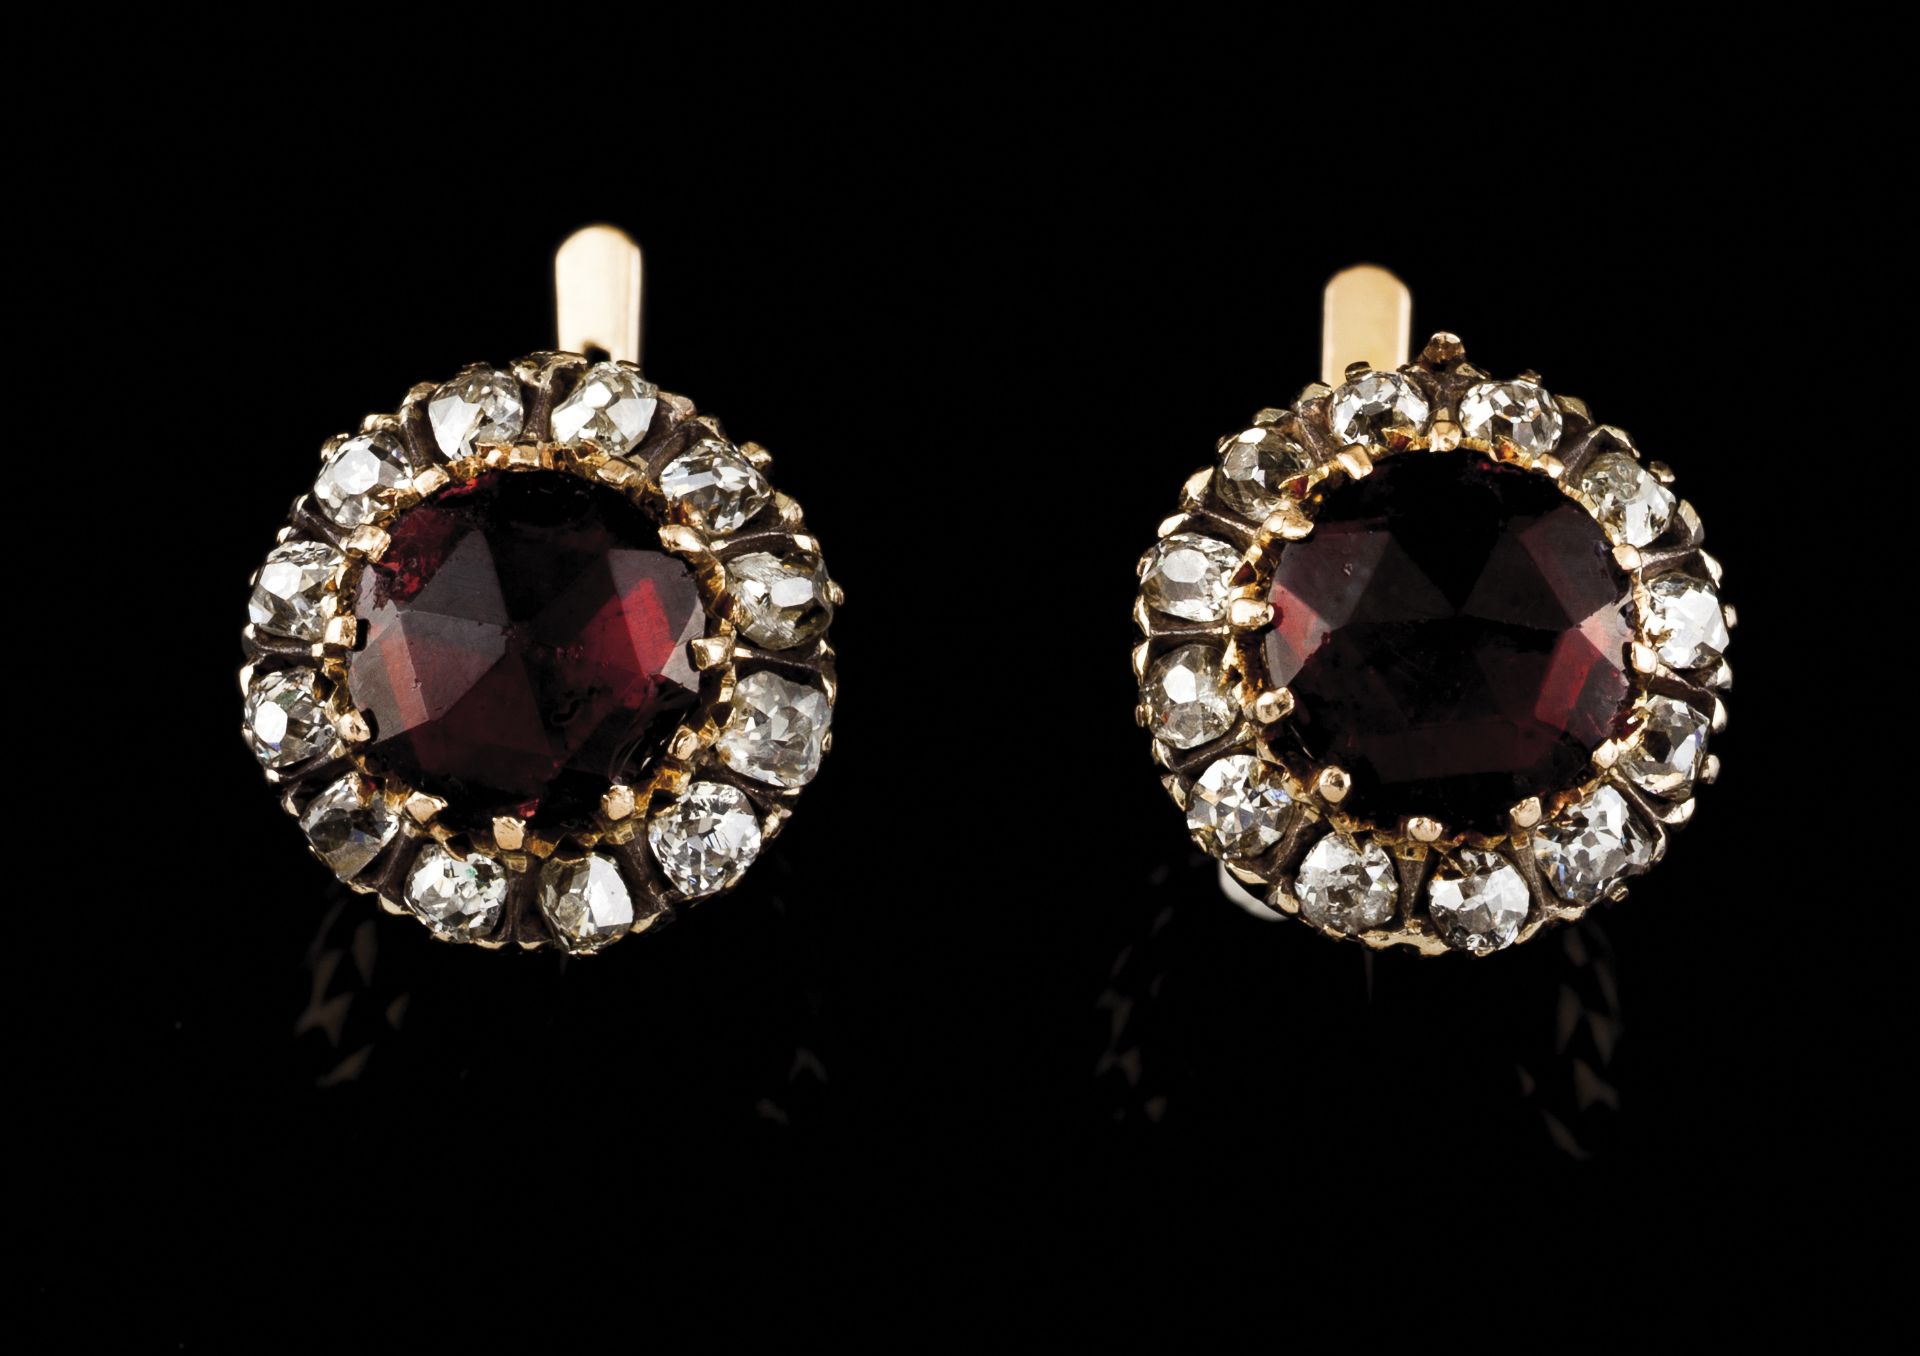 A pair of galleried earringsGoldCentral faux stone framed by 24 antique brilliant cut diamonds